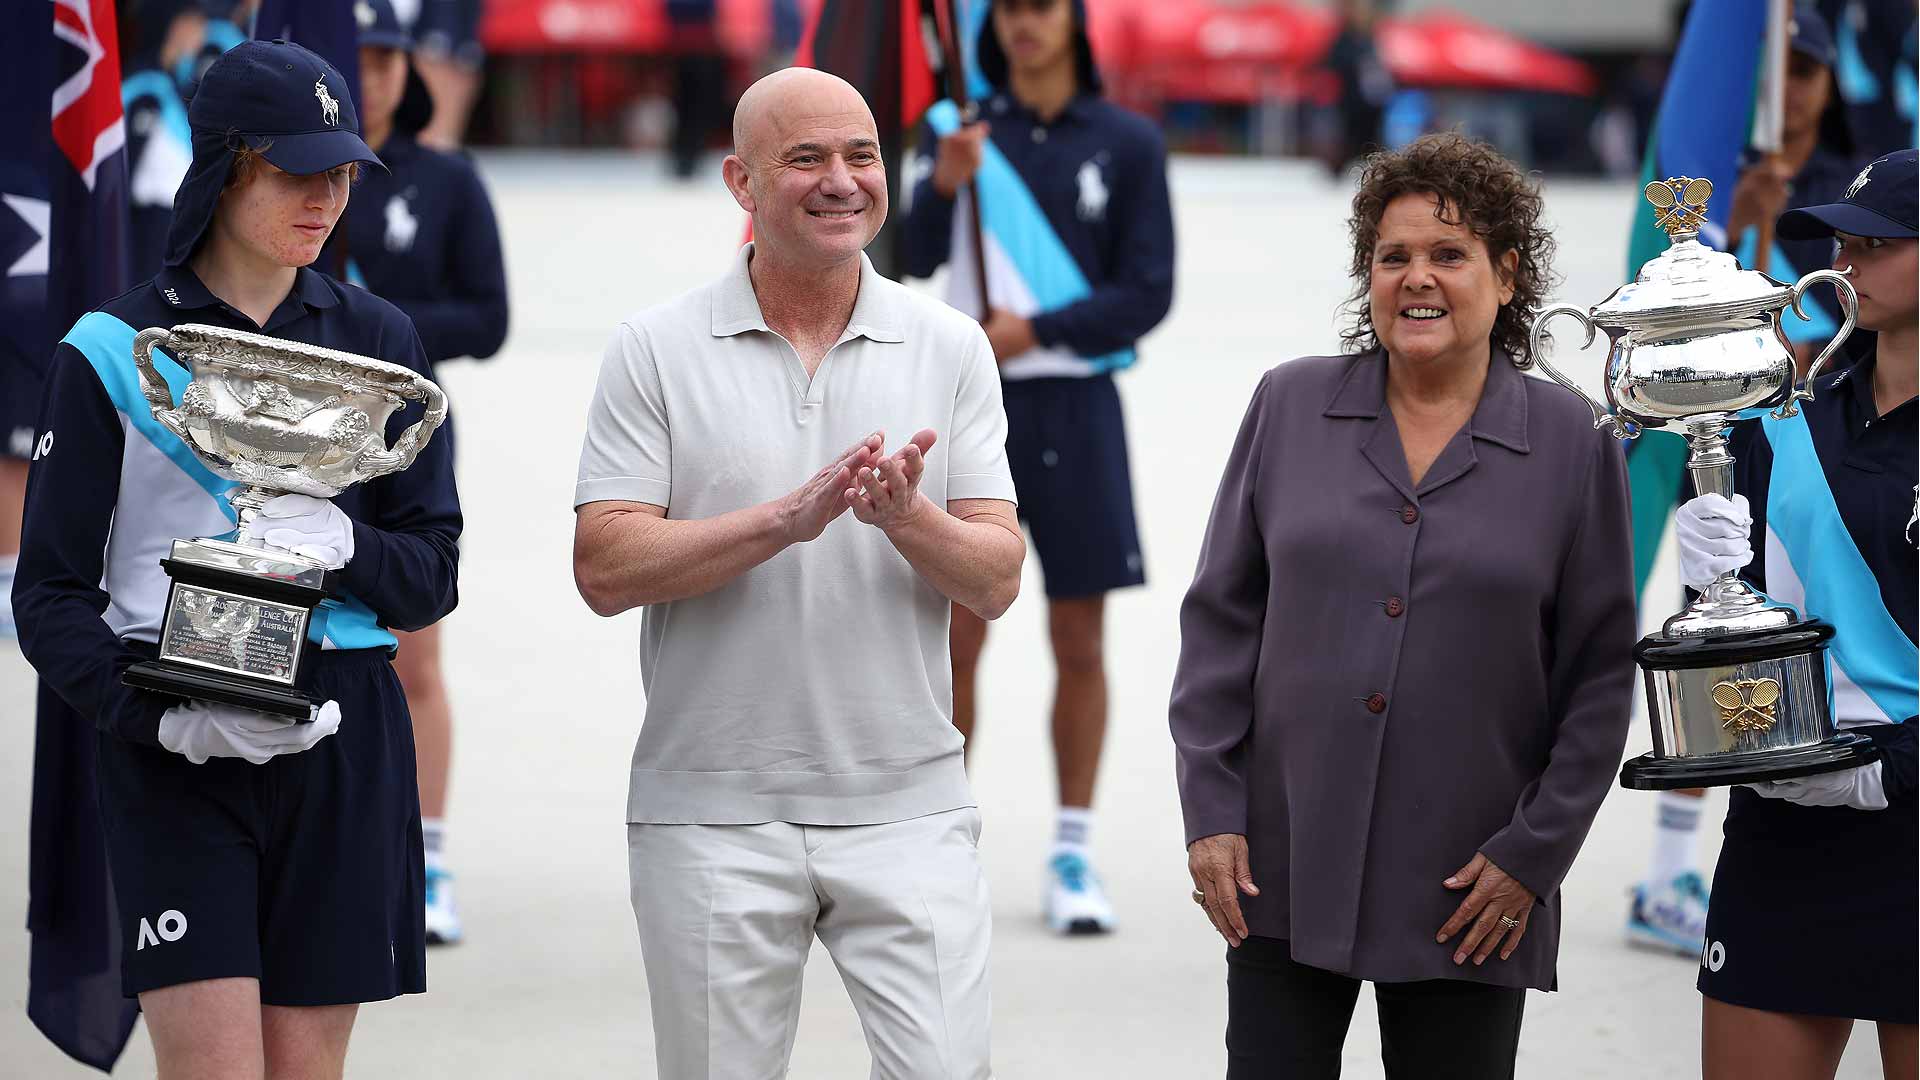 Andre Agassi arrives at Australian Open, chats with Carlos Alcaraz, ATP  Tour